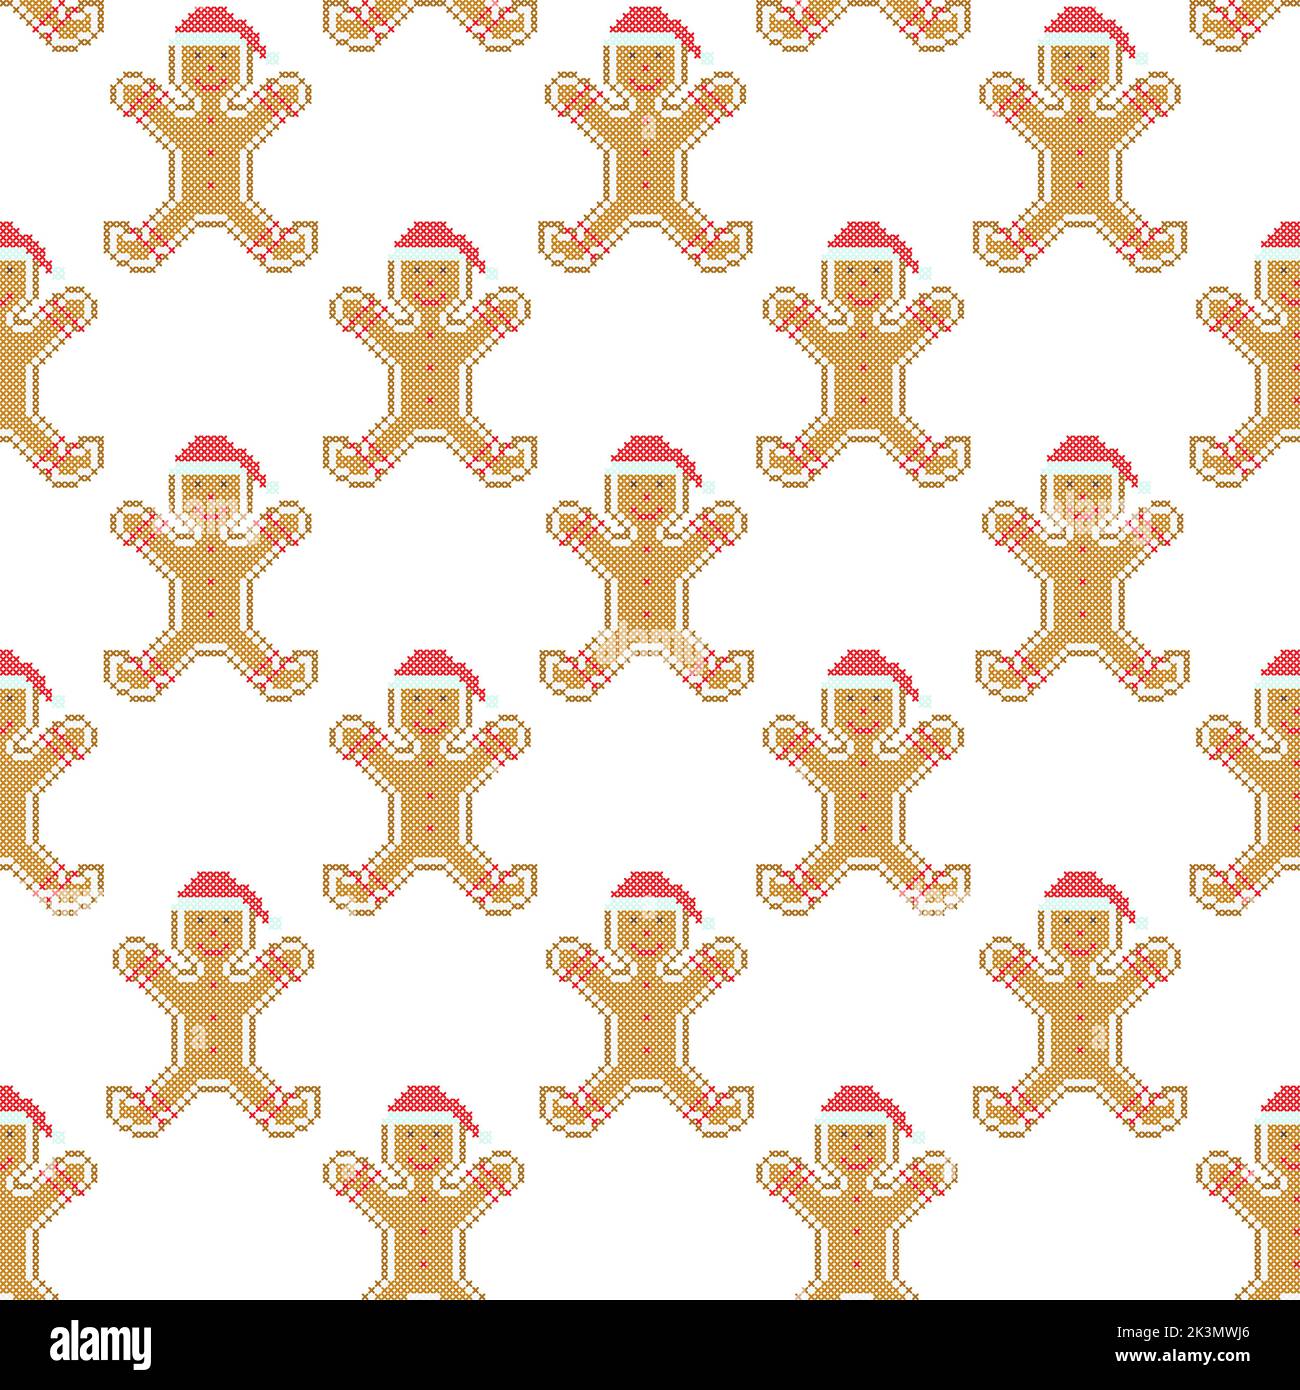 Merry Christmas vector seamless pattern. Christmas cookies gingerbread man cross stitch embroidery. Stock Vector